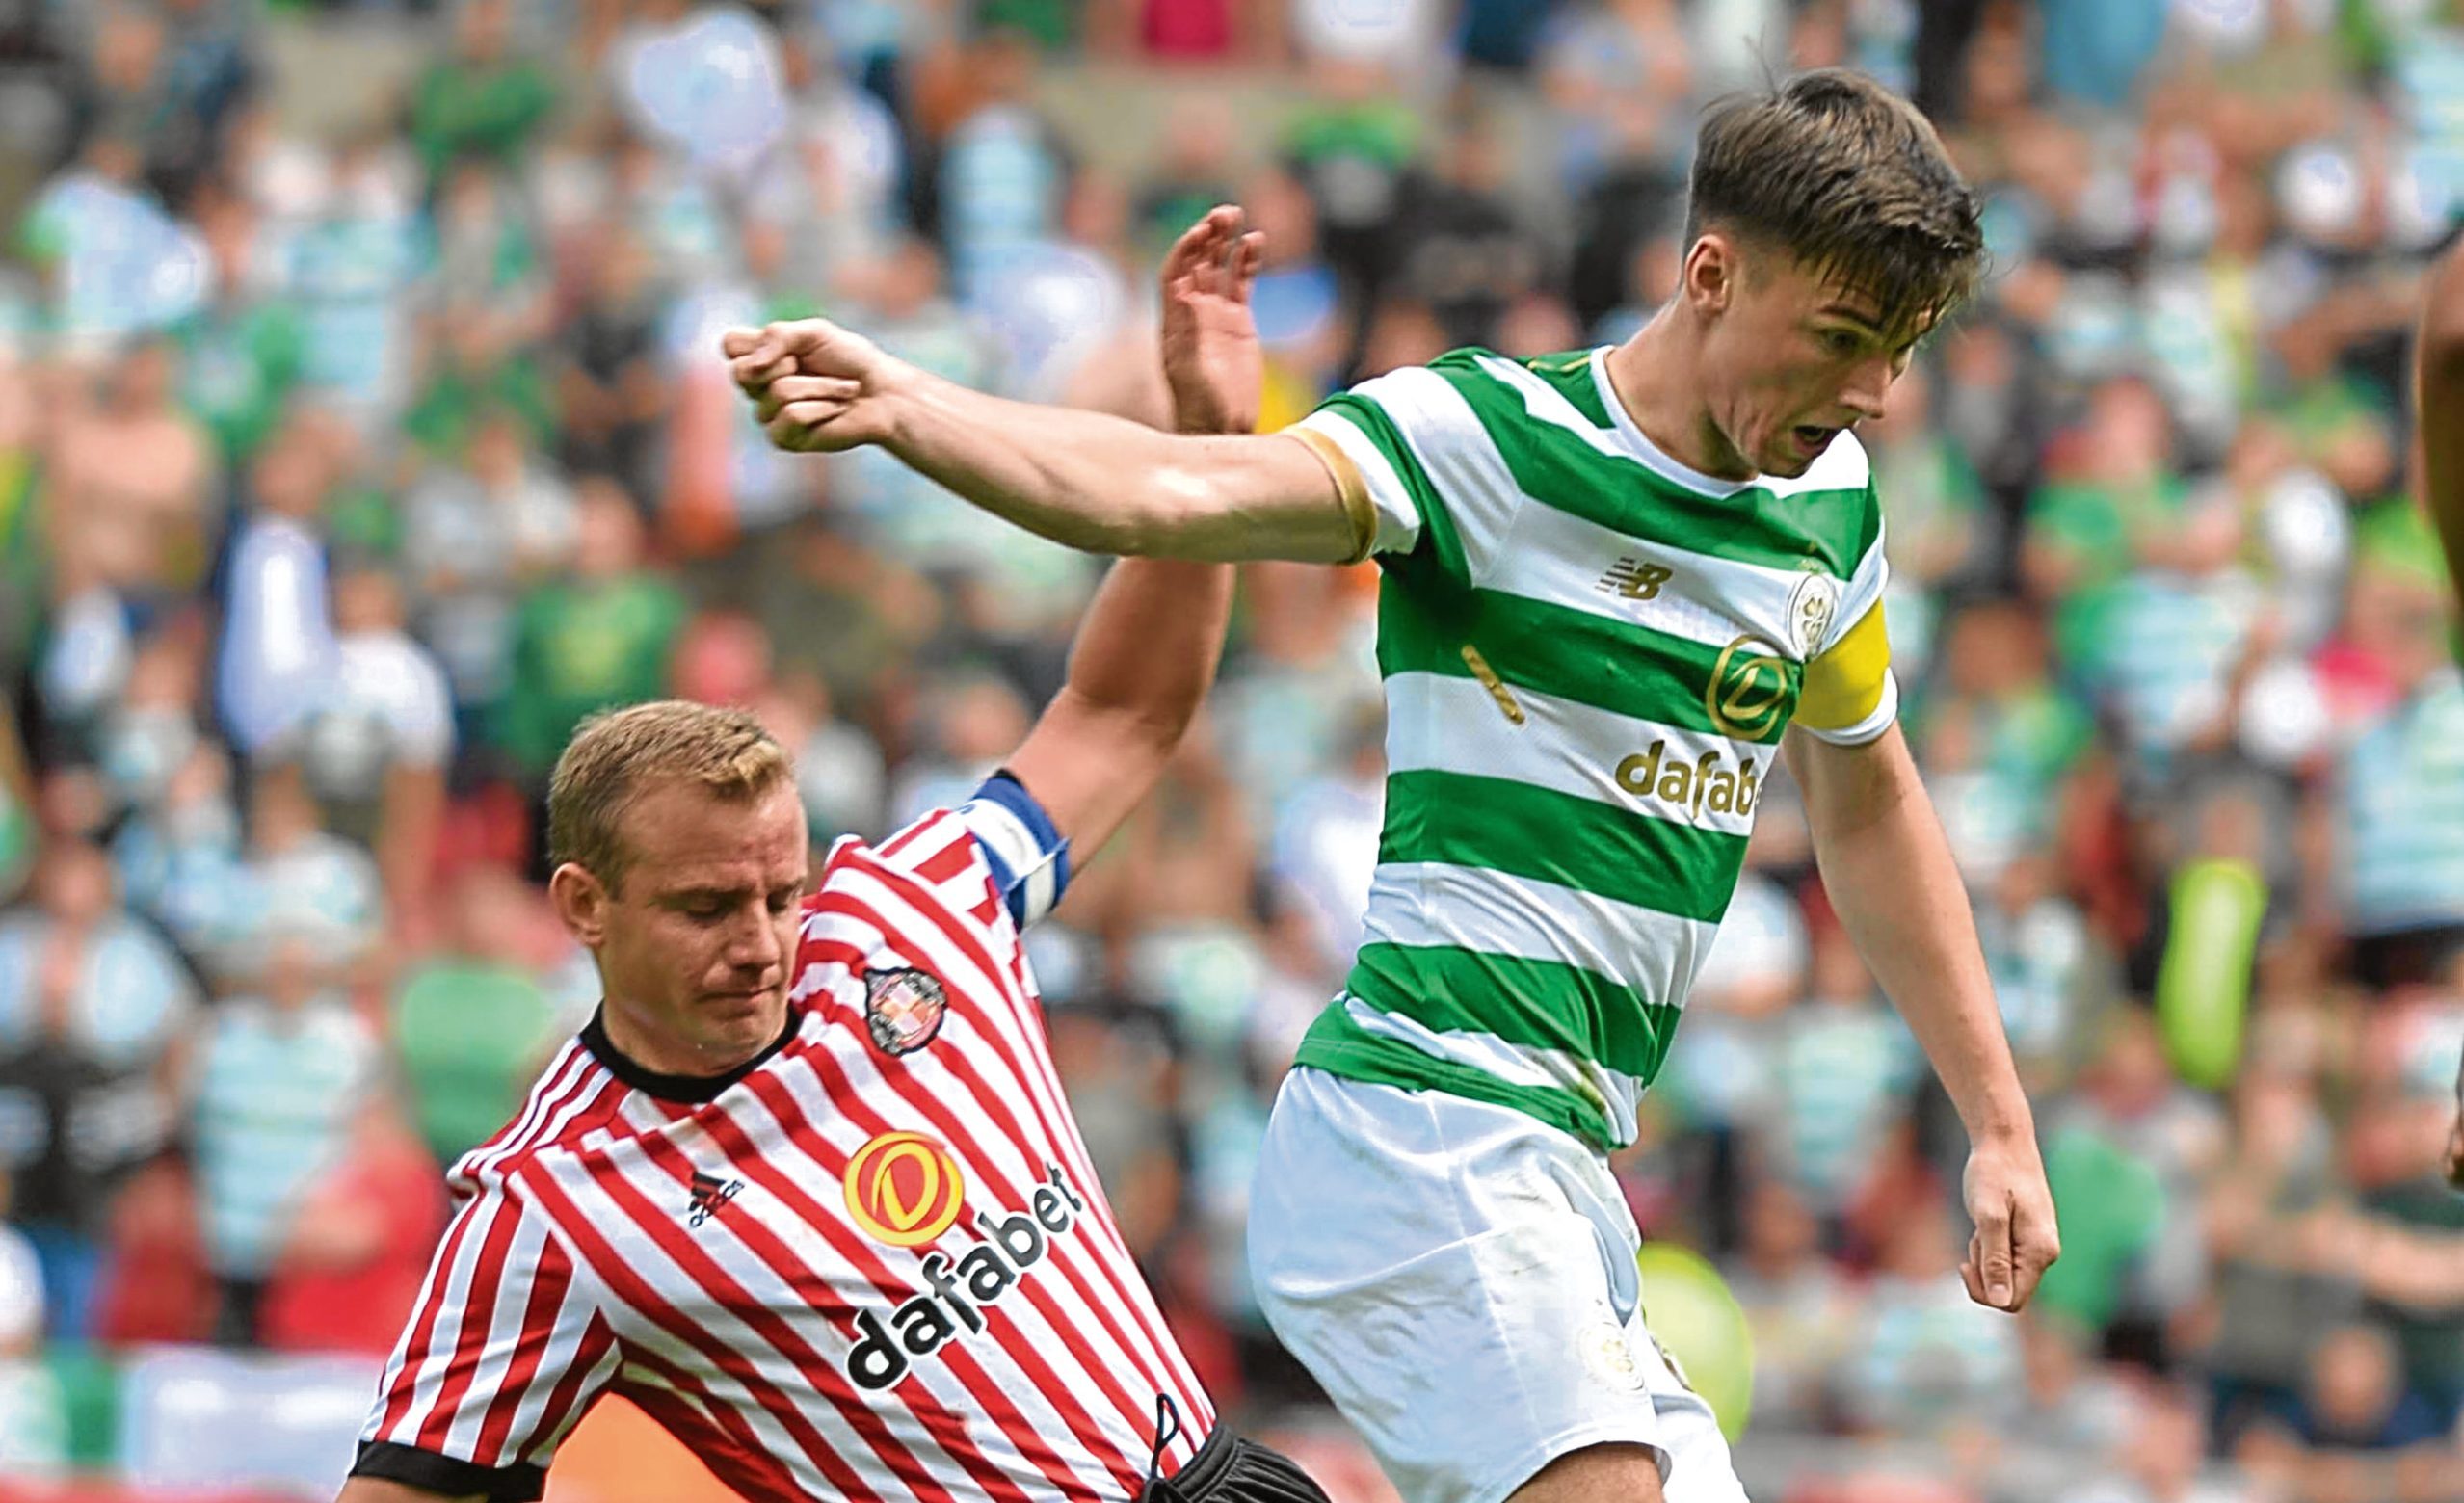 Kieran Tierney of Celtic is tackled by Lee Cattermole of Sunderland (Paul Vicente)